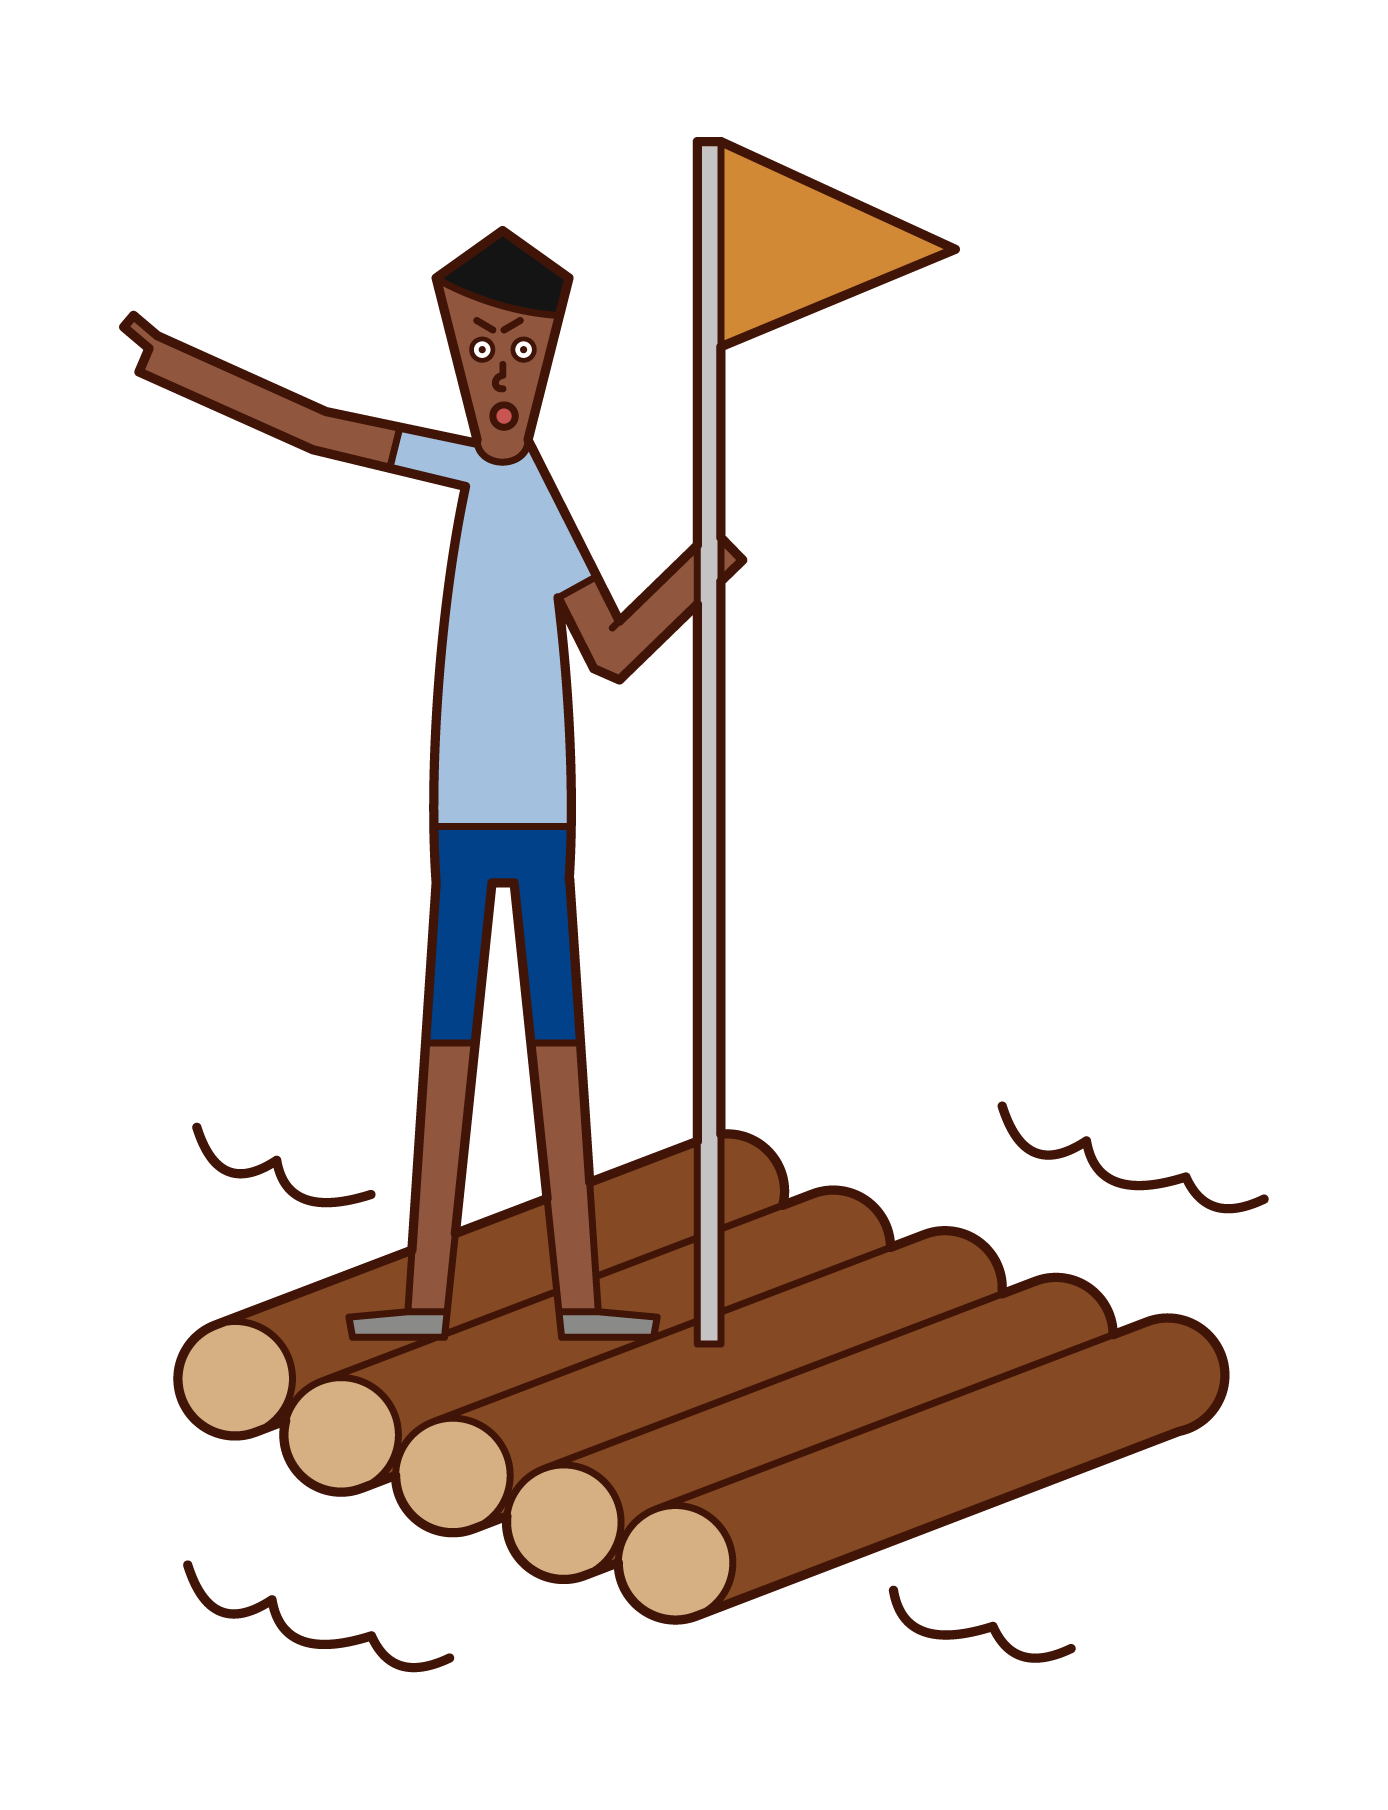 Illustration of a man traveling on a raft